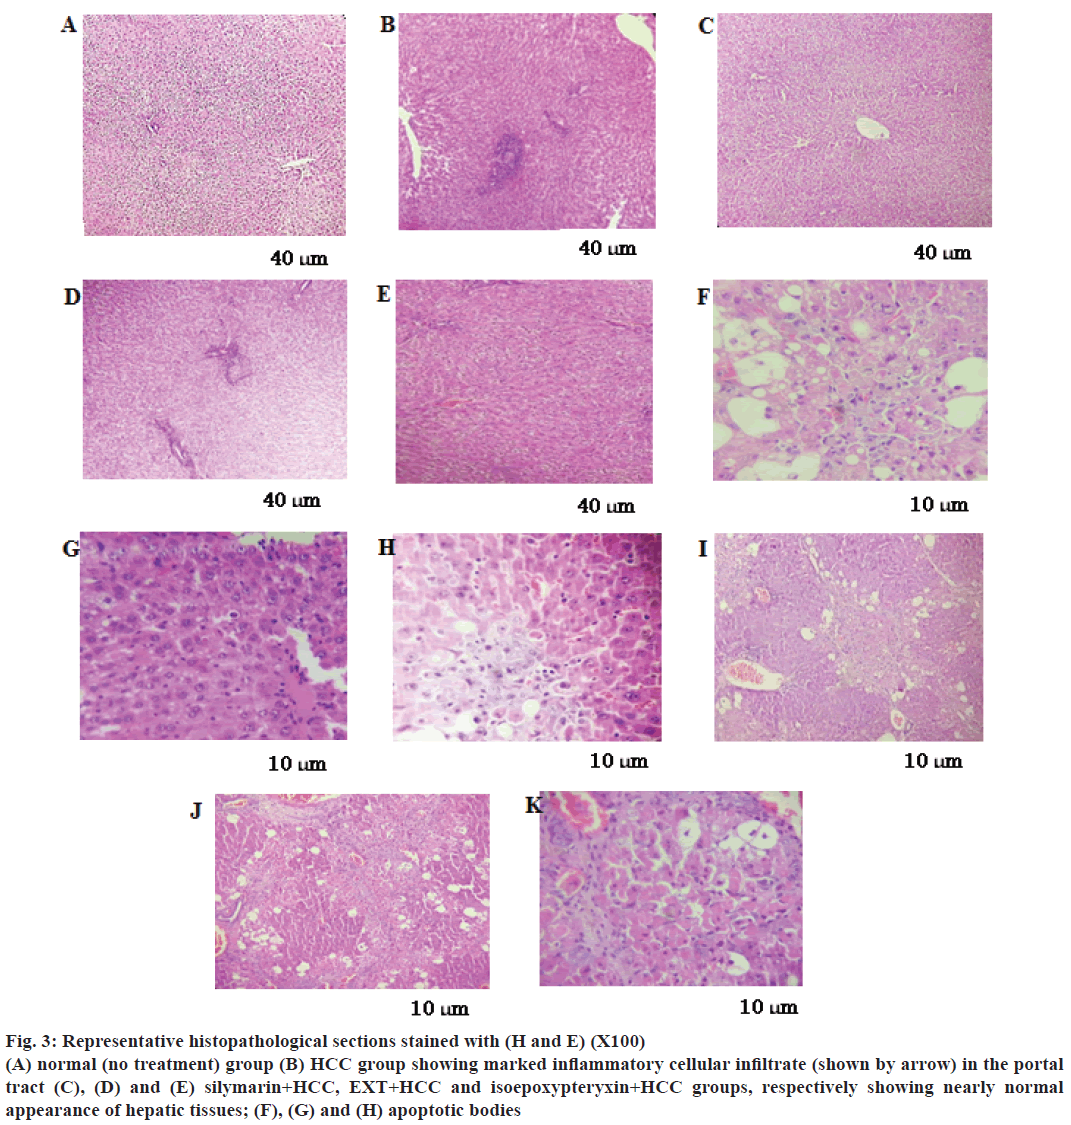 IJPS-histopathological-sections-stained